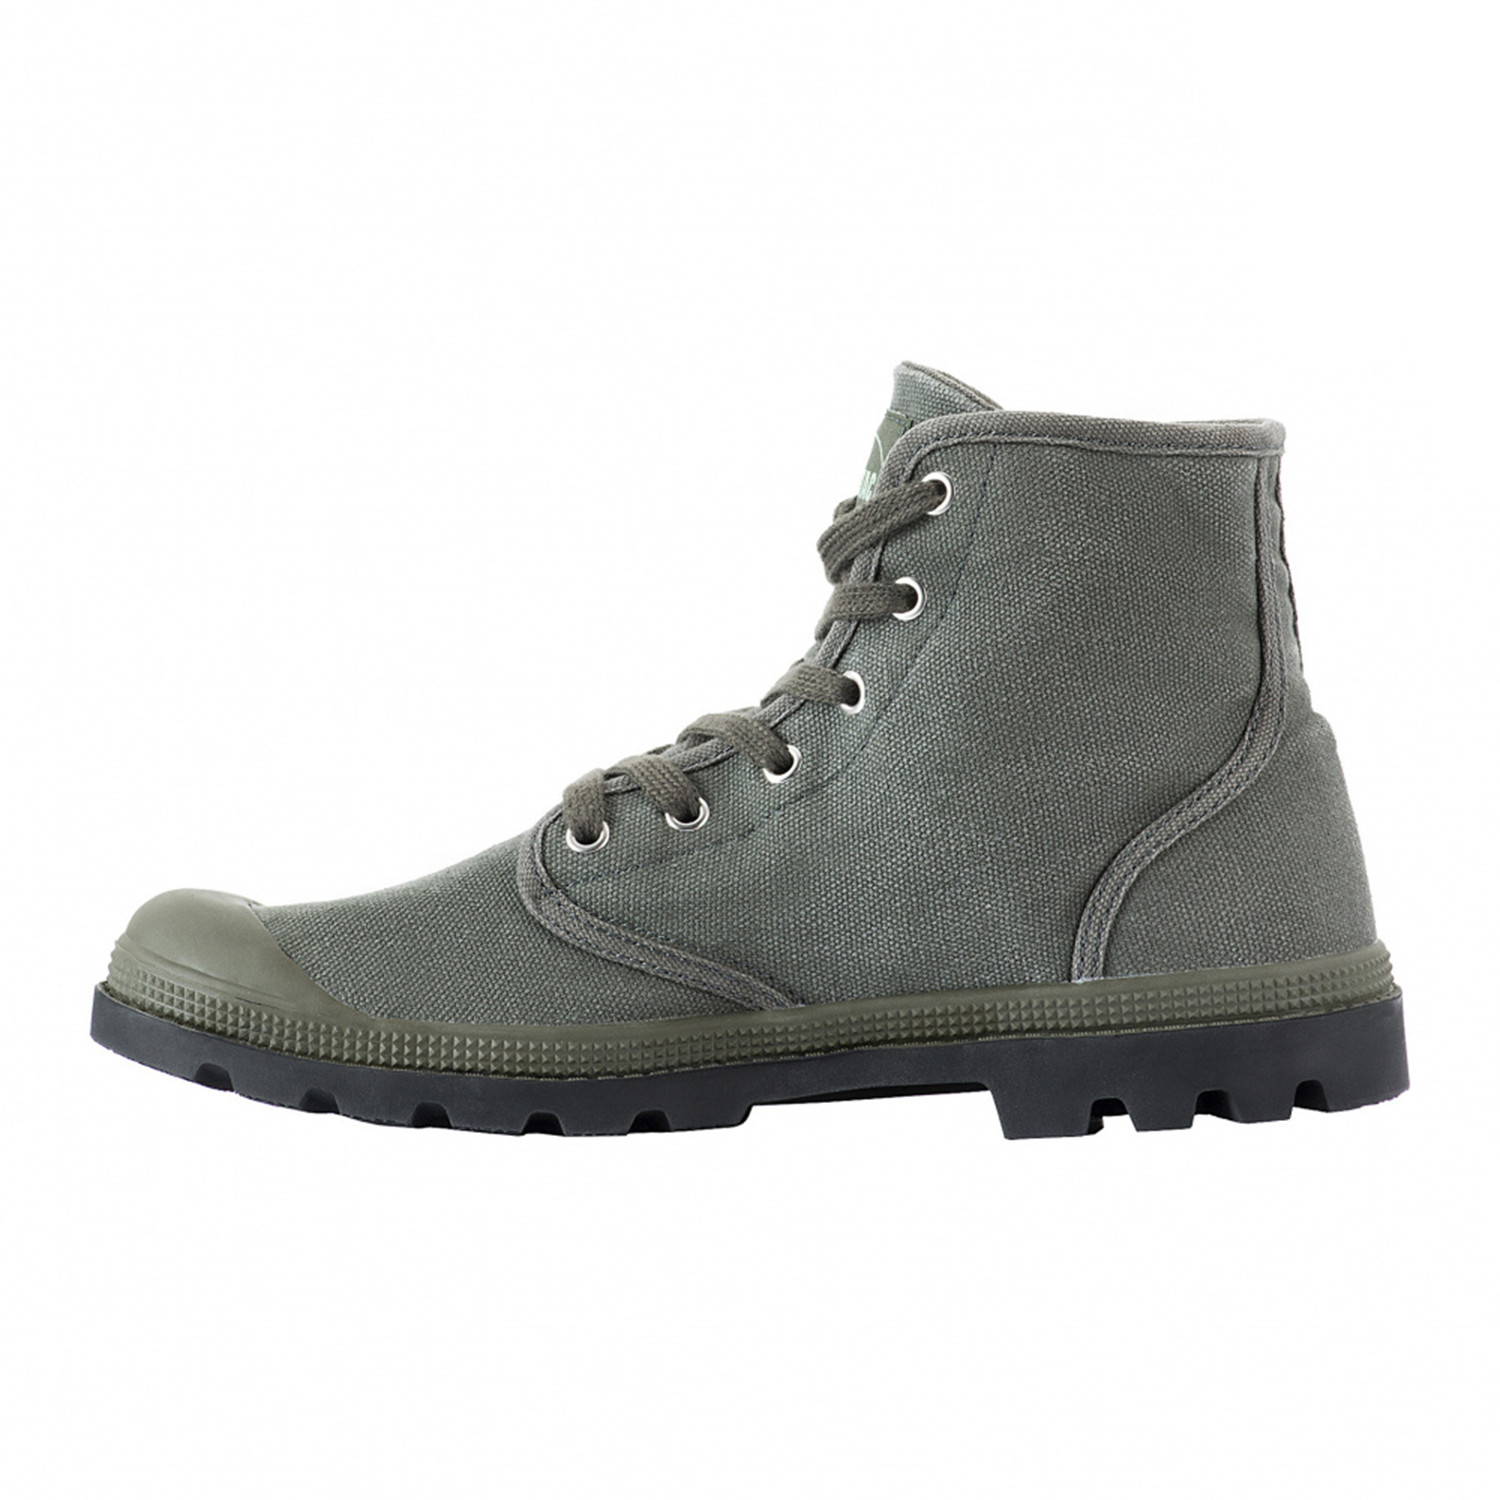 Rocky Mountains Sneaker Boots // Olive (Euro: 37) - M-Tac - Touch of Modern